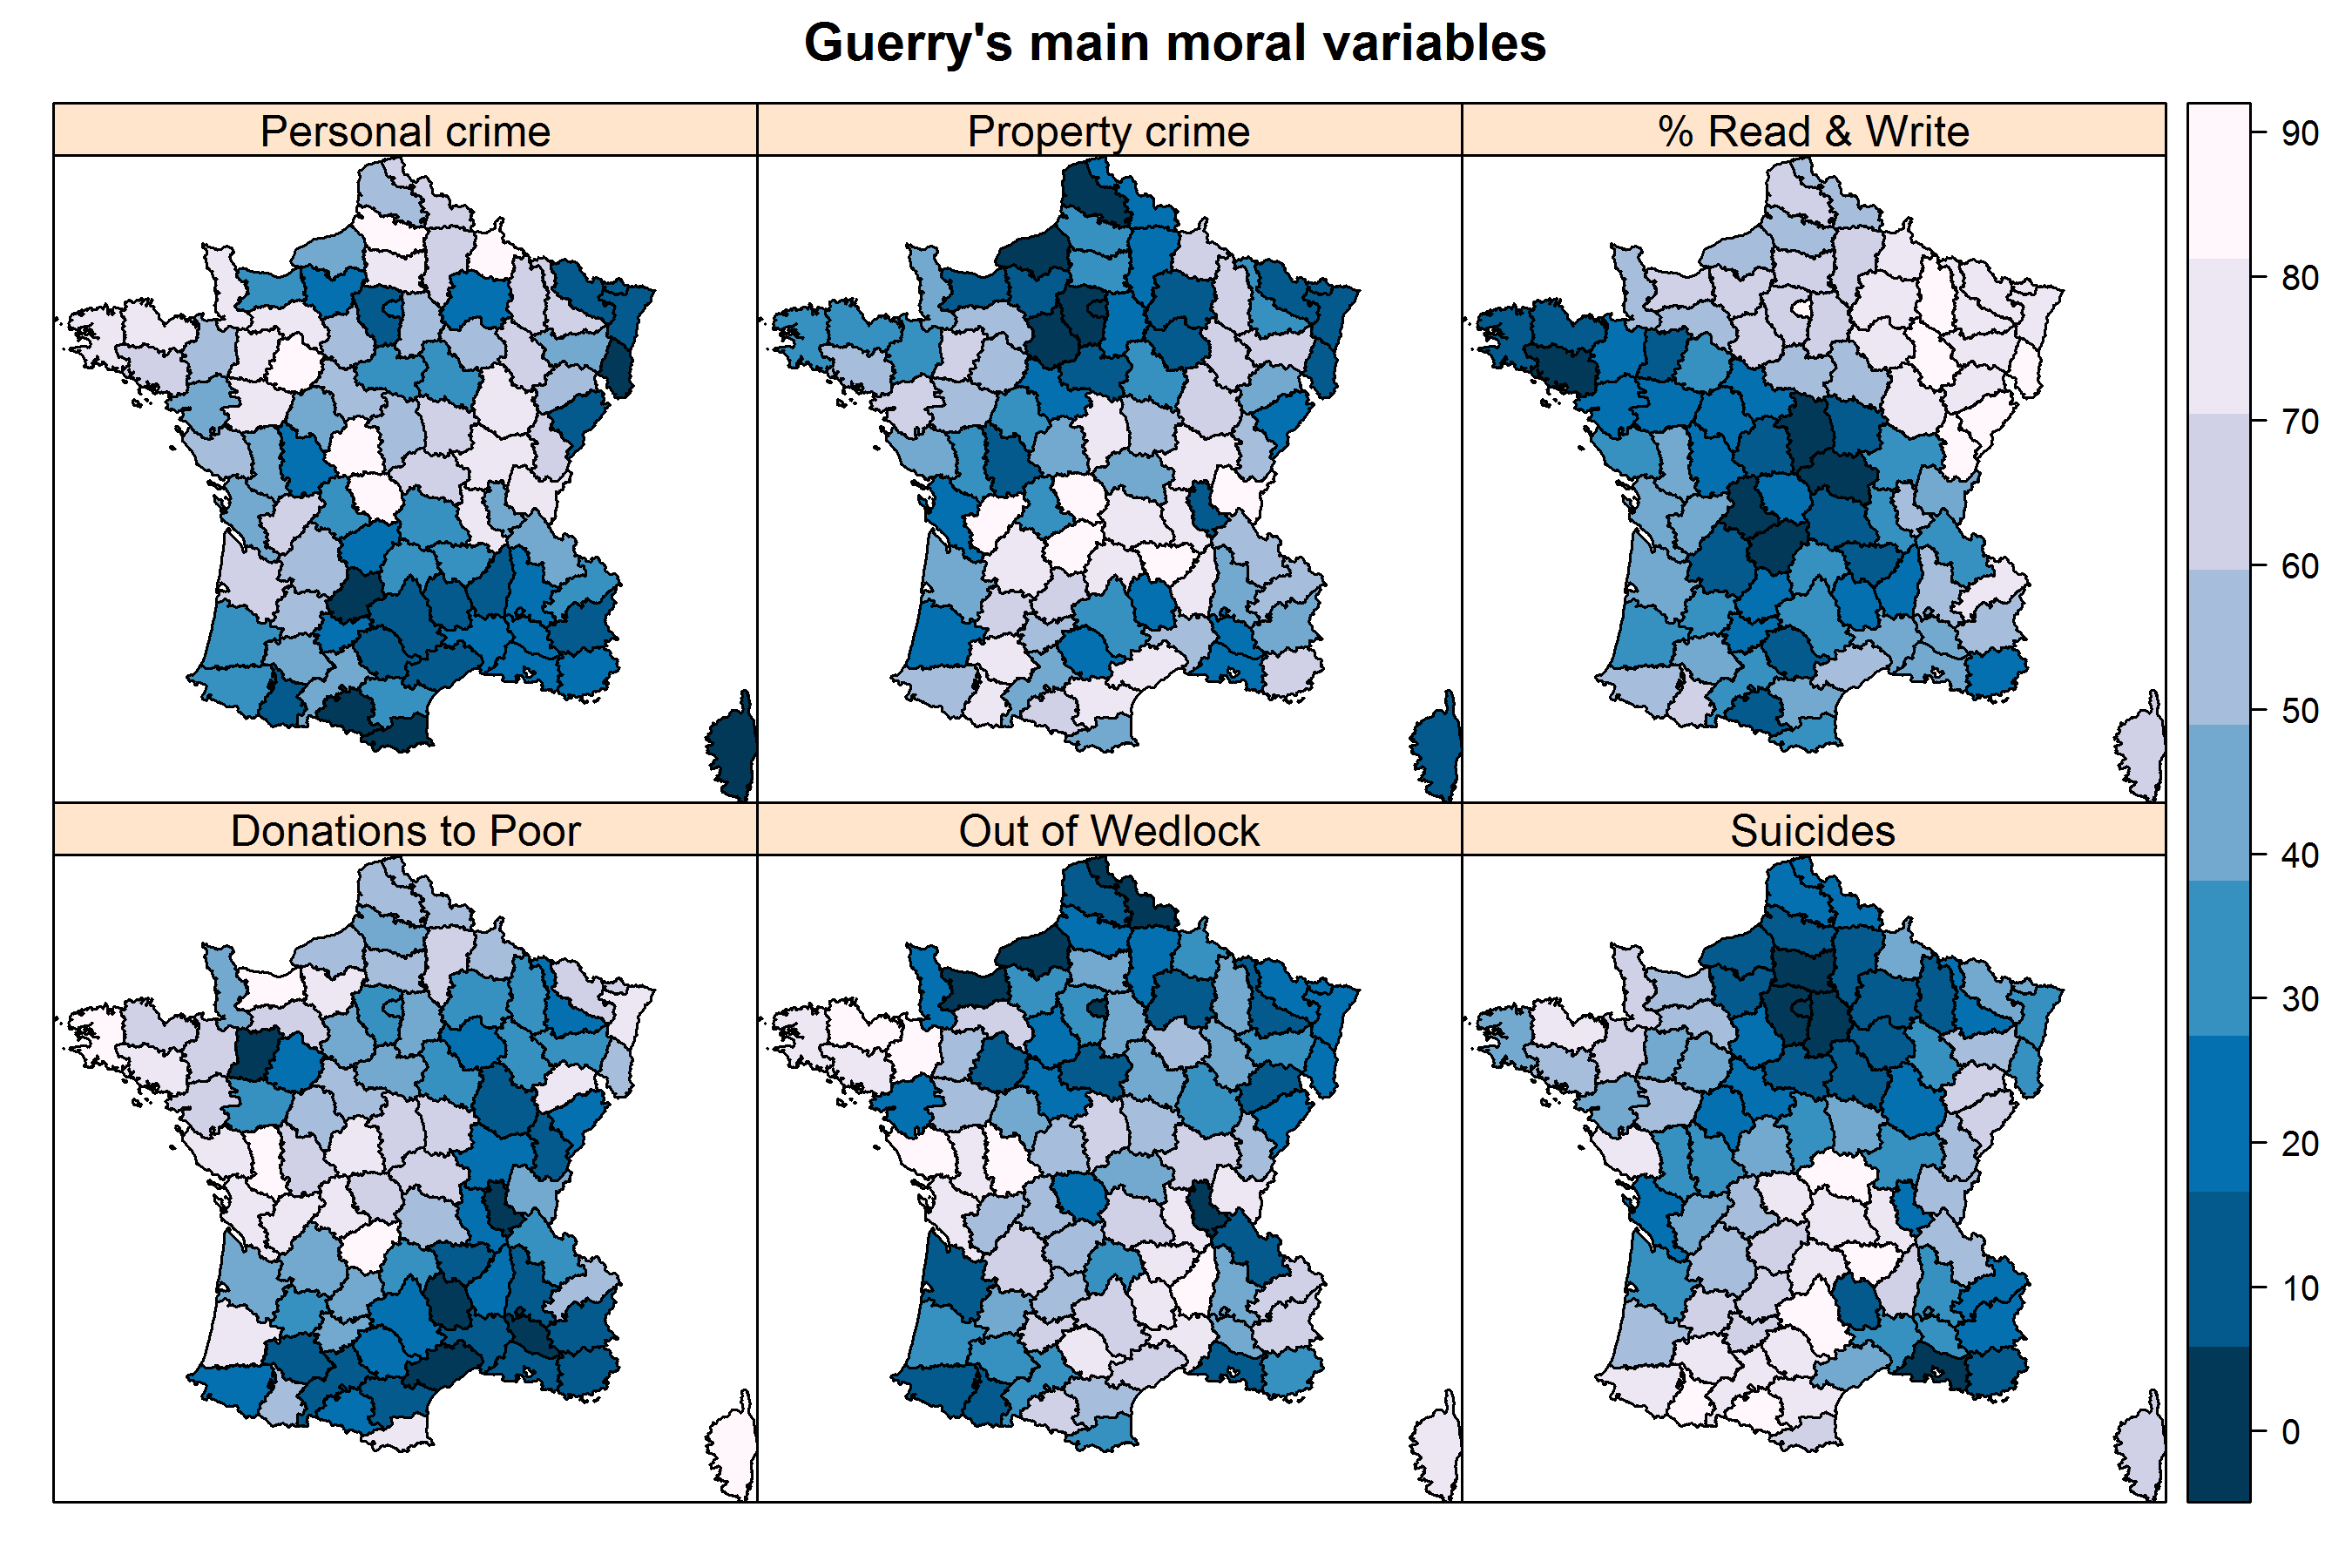 Reproduction of Guerry’s six maps: As in Guerry’s originals, darker shading signifies worse on each moral variable.